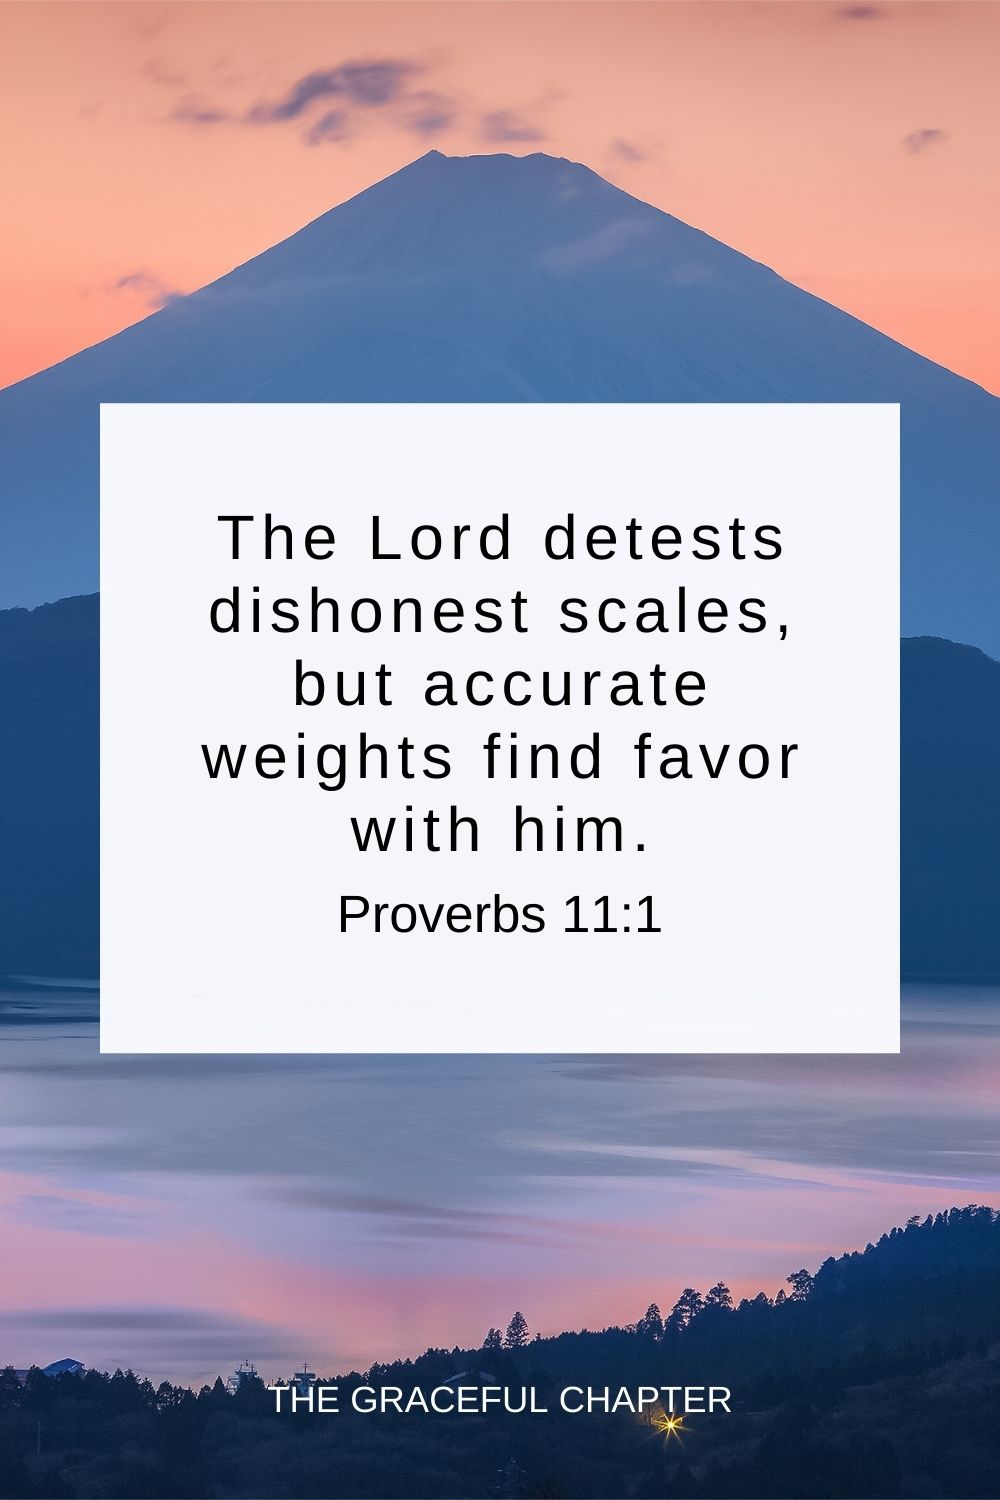 The Lord detests dishonest scales, but accurate weights find favor with him. Proverbs 11:1